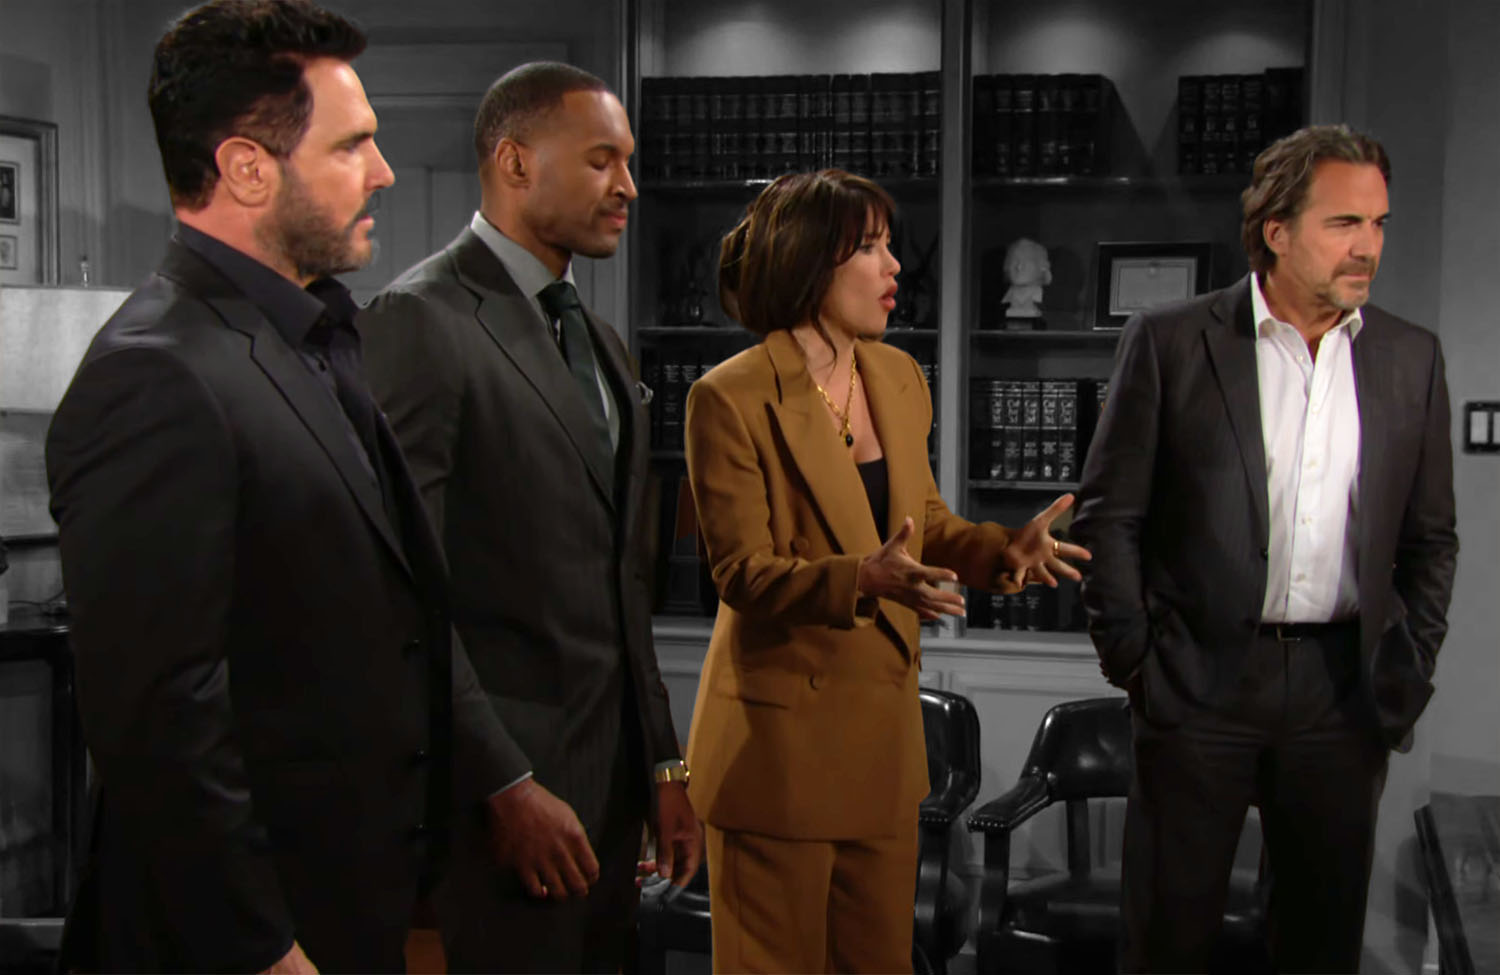 Bill, Carter, Steffy and Ridge in The Bold and the Beautiful